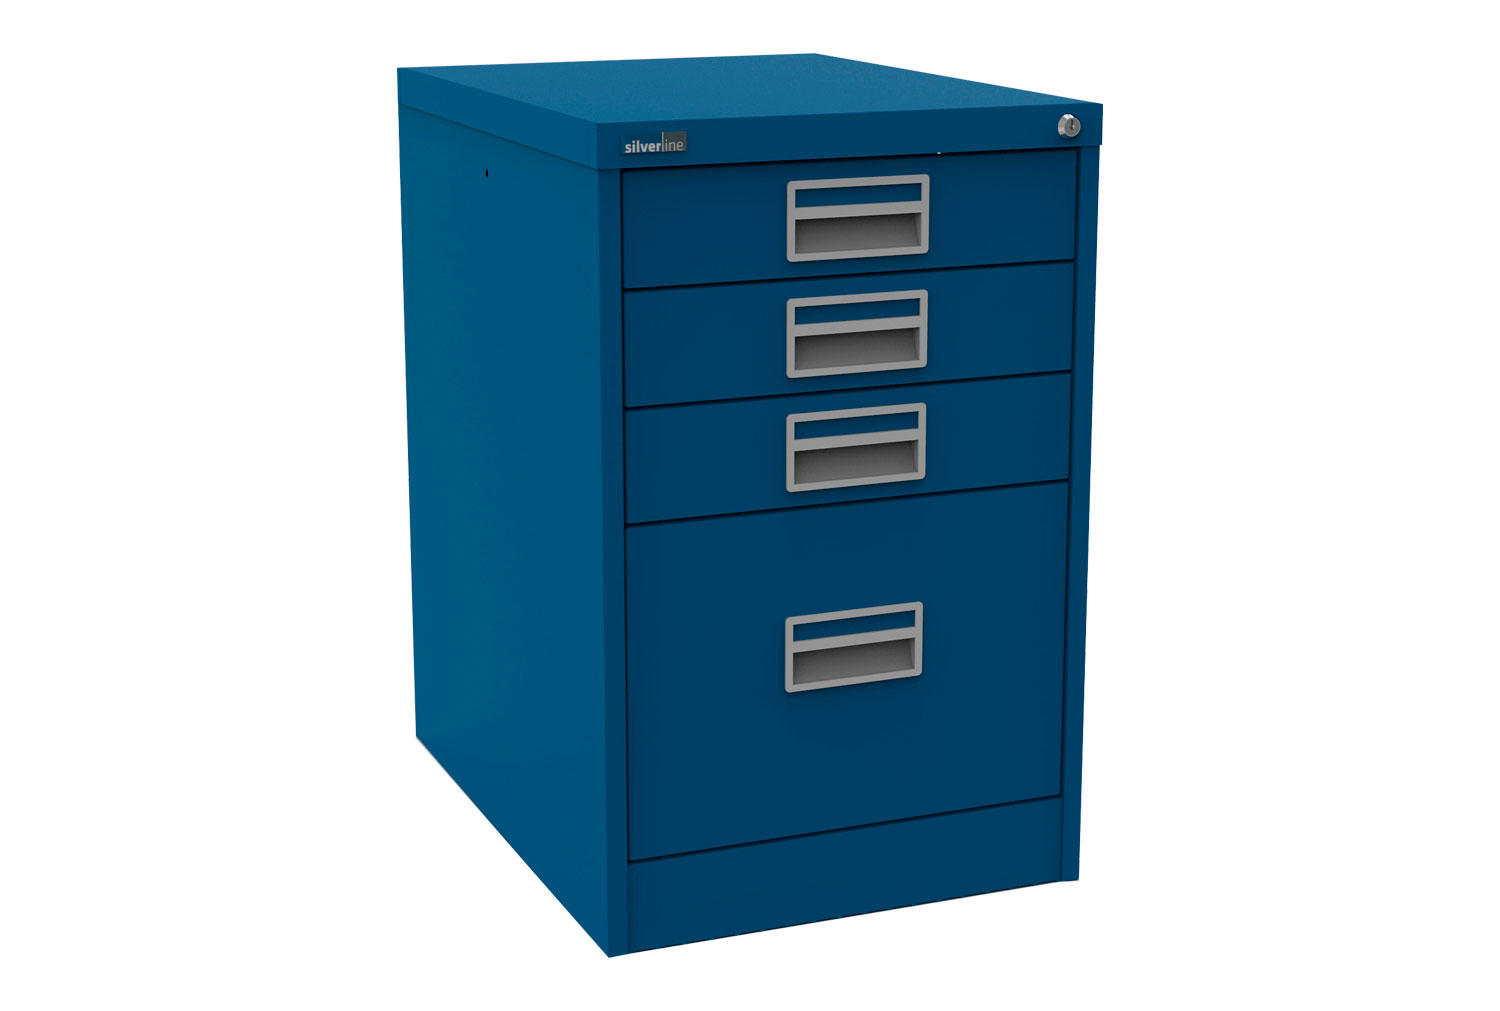 Silverline Midi 1+3 Drawer Filing Cabinets, 1+3 Drawer - 46wx62dx71h (cm), Blue, Fully Installed